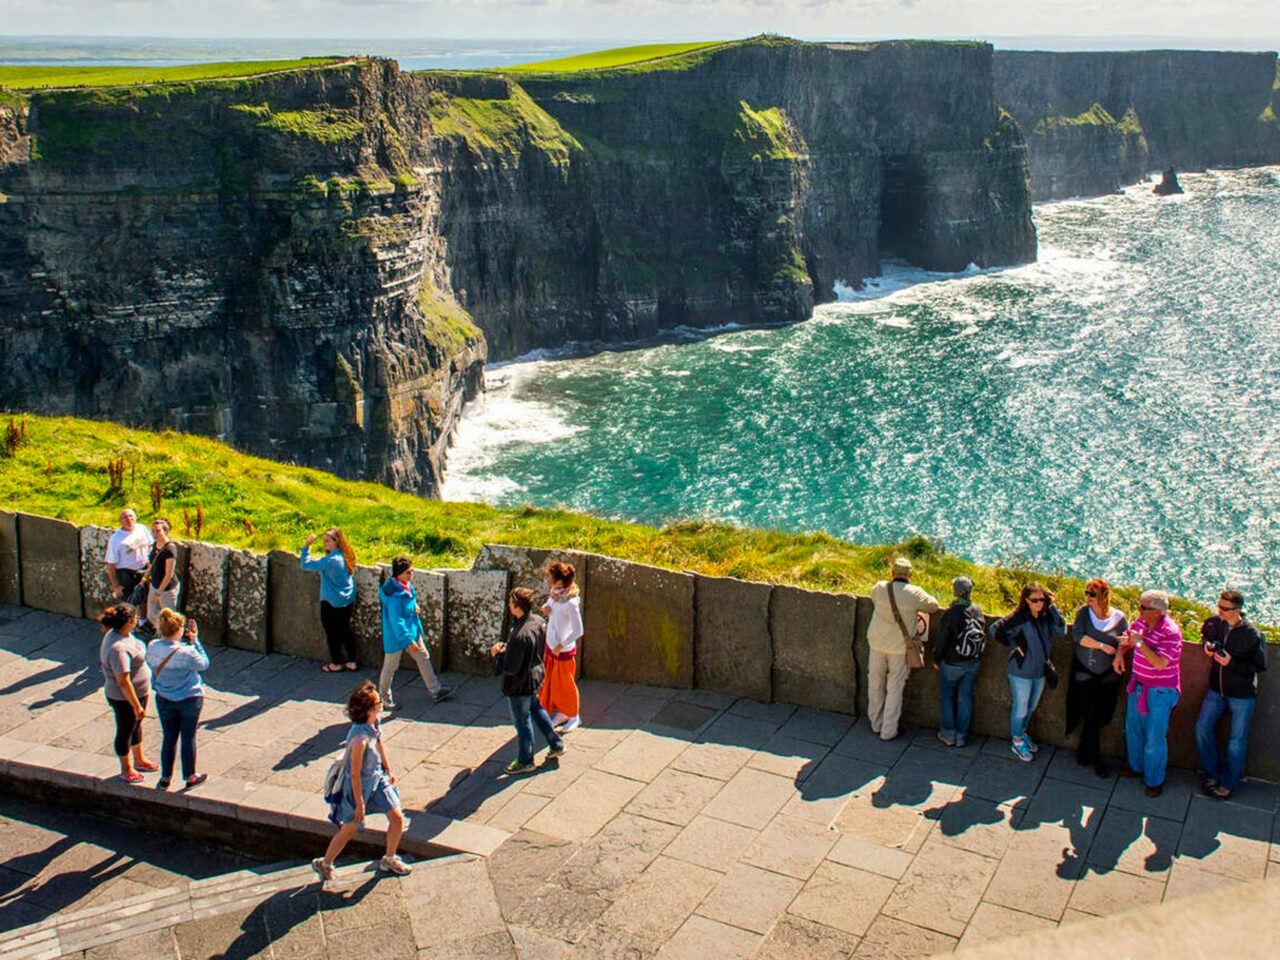 Loras College Studies abroad in Ireland and will observe the natural cliffs and waterway